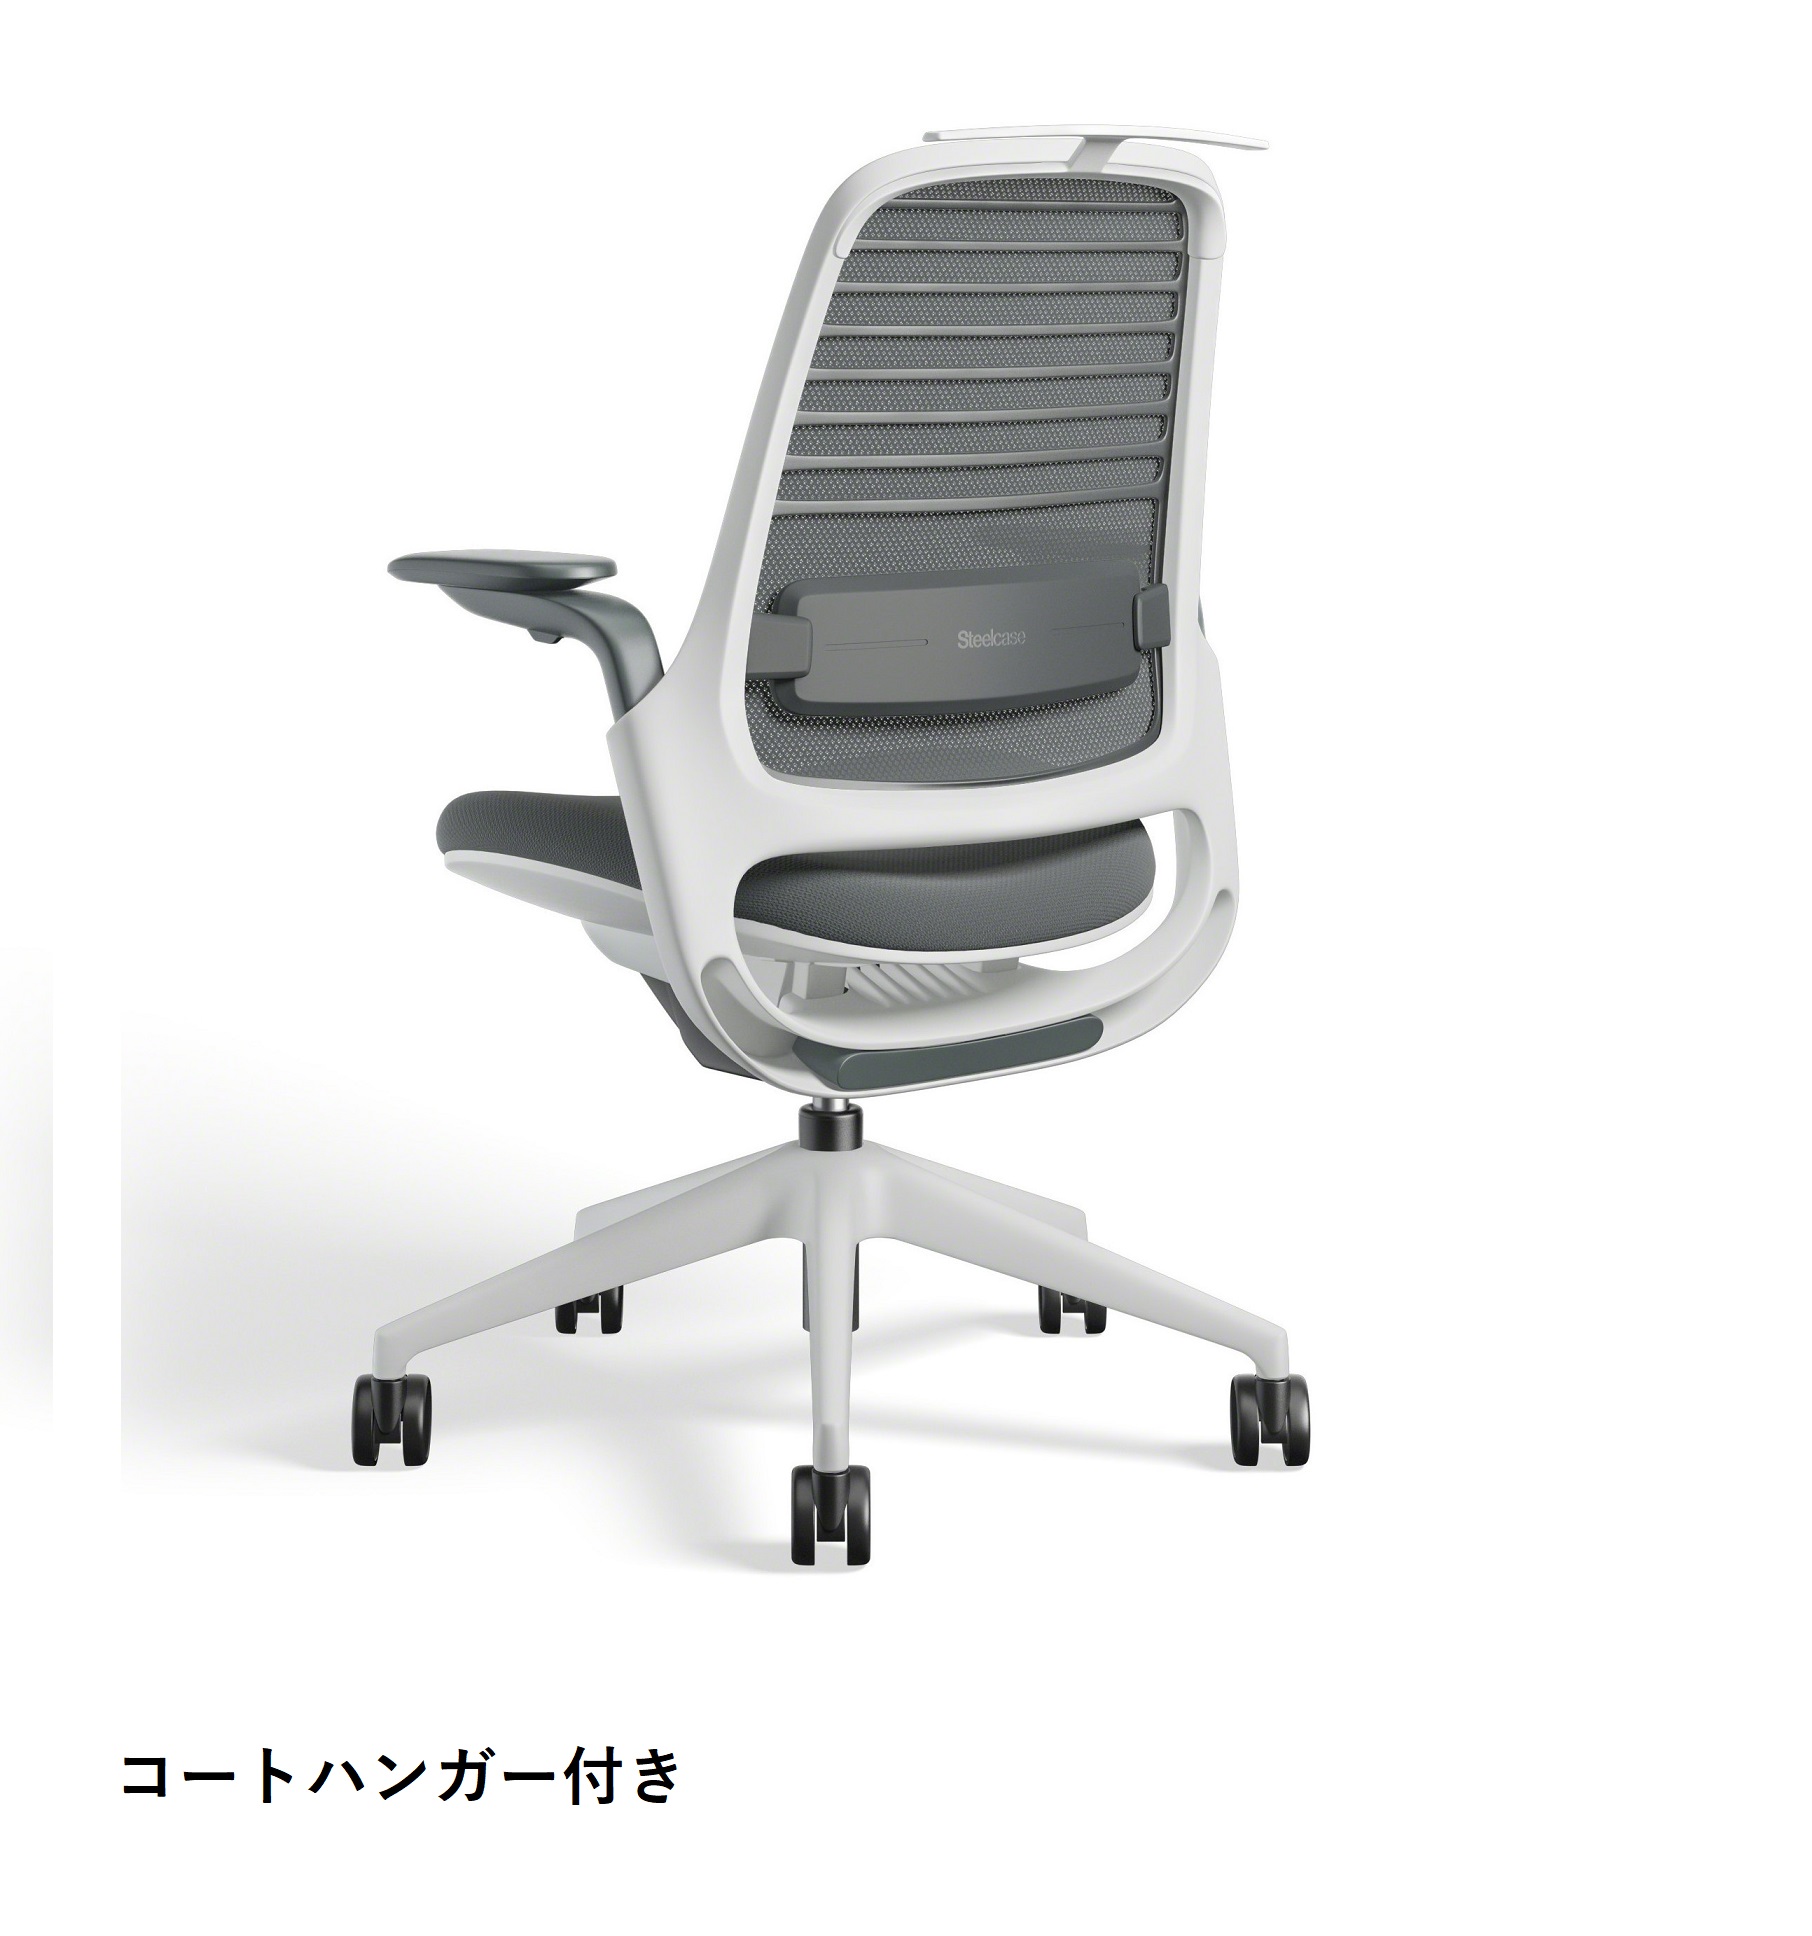 Steelcase スチールケース「Parade」スタッキングチェア 1脚分-